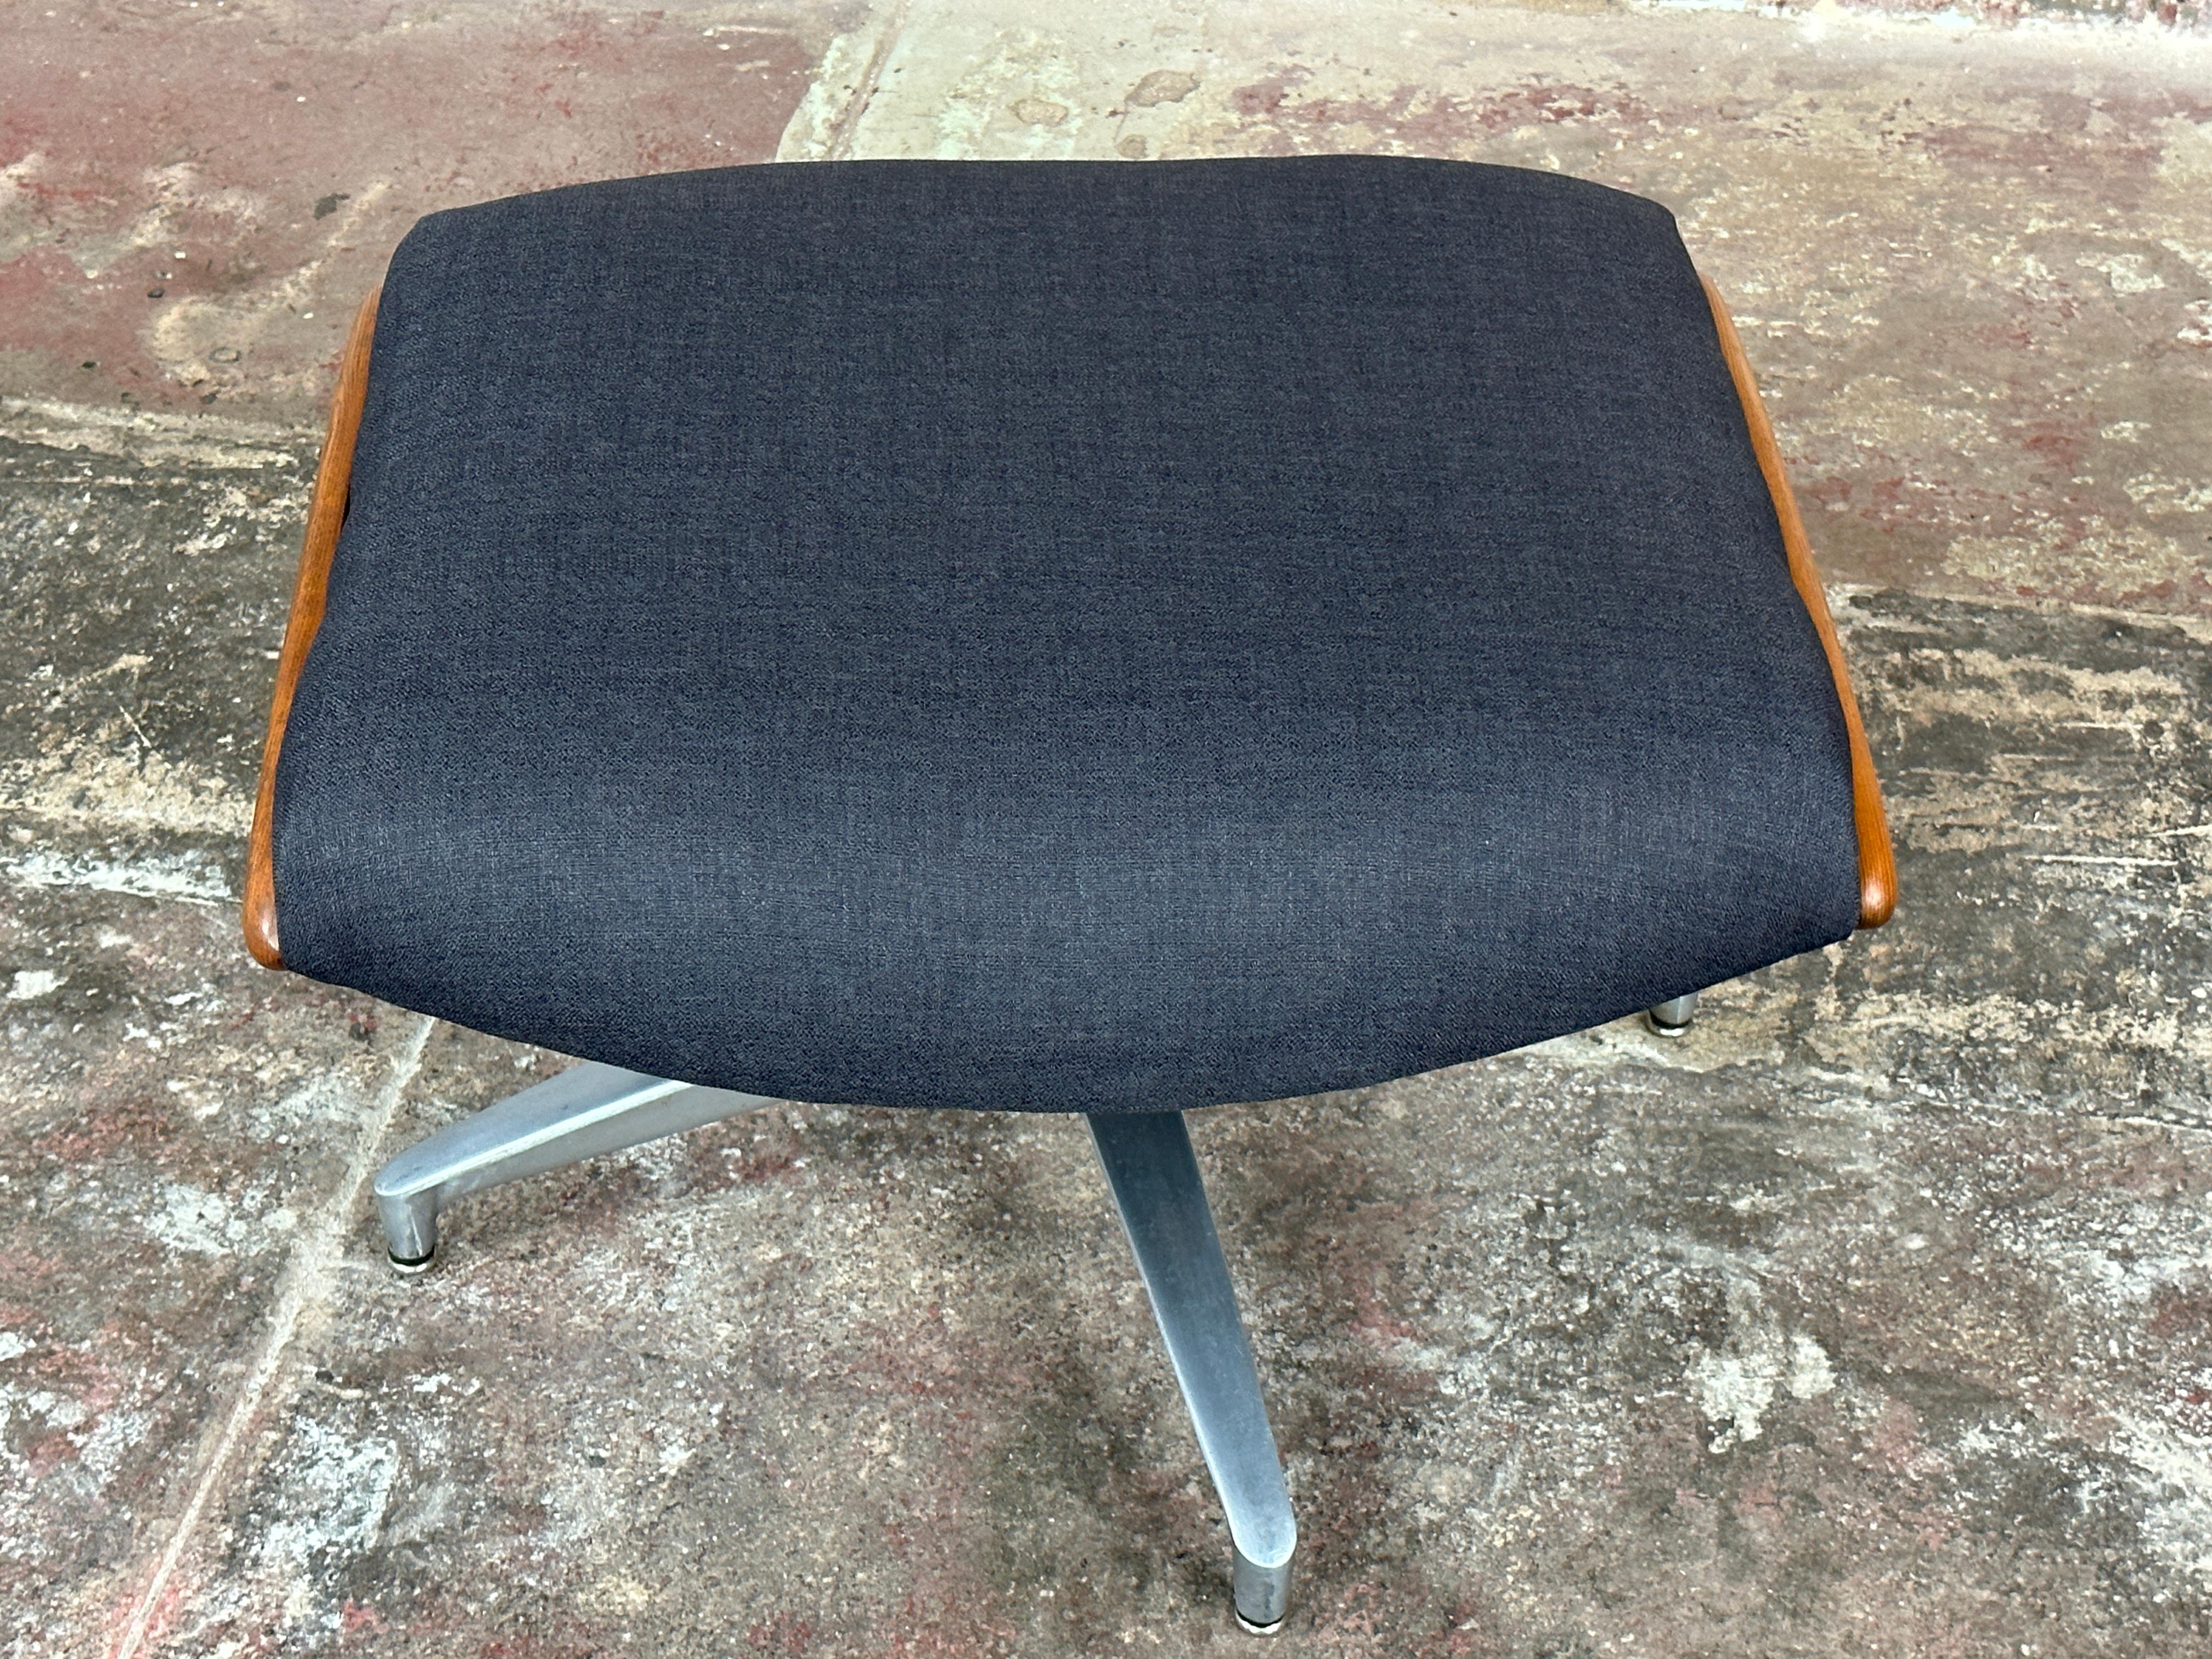 Inspired by the timeless designs of Charles Eames, this Mid-Century Swivel Ottoman  combines simplicity and functionality.

A polished stainless steel base provides stability to this swivel ottoman, accentuating the dark blue-grey upholstered seat